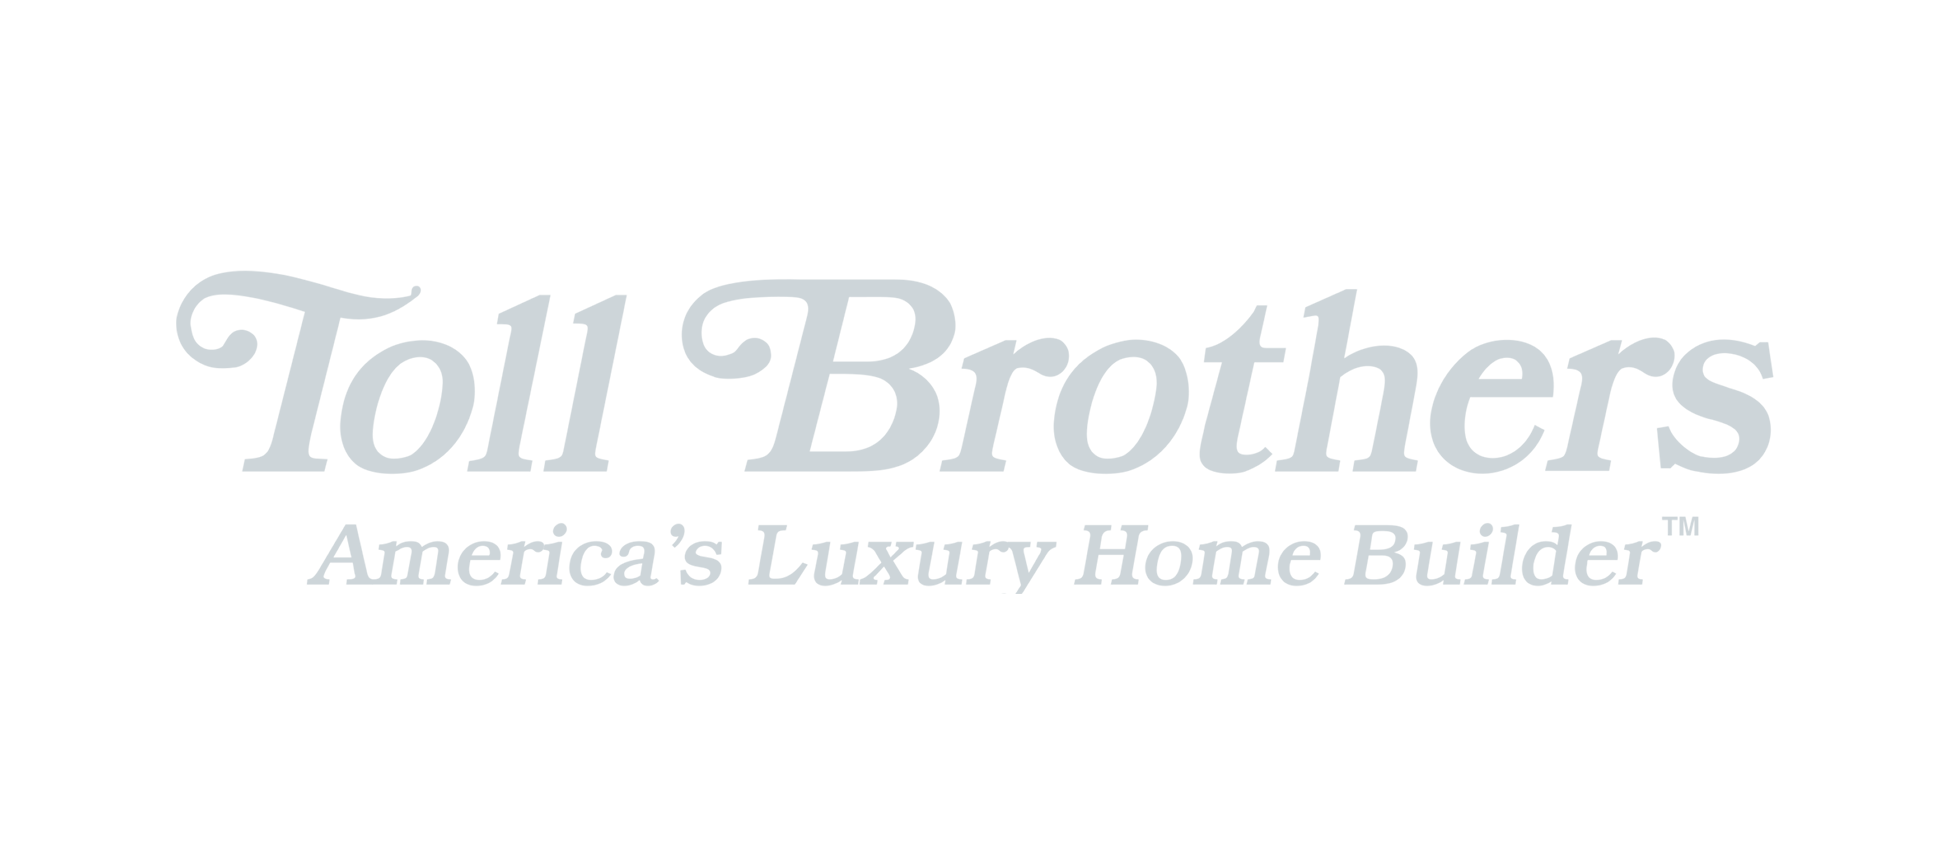 toll-brothers-logo-png-transparent-e1527804131781.png